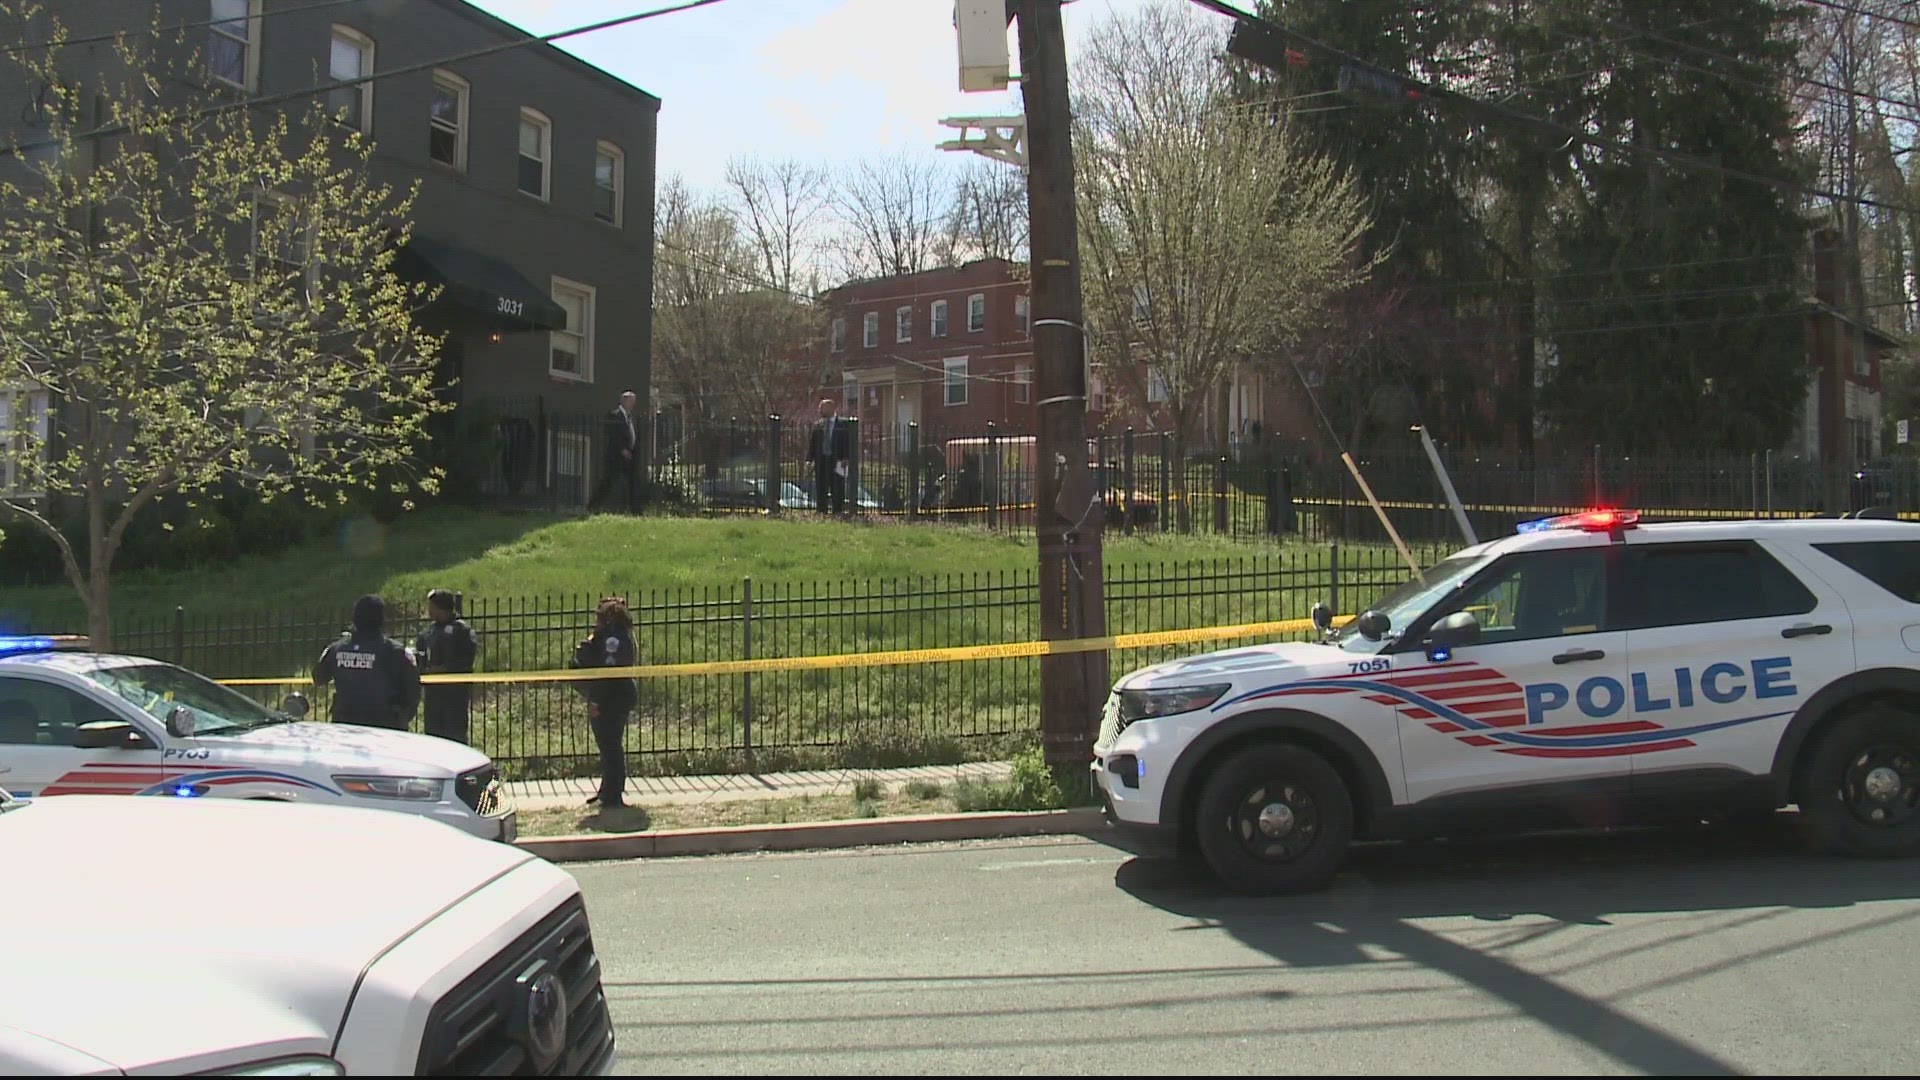 Two men were shot in Southeast D.C. late Wednesday morning, the Metropolitan Police Department said. One of those men has died.